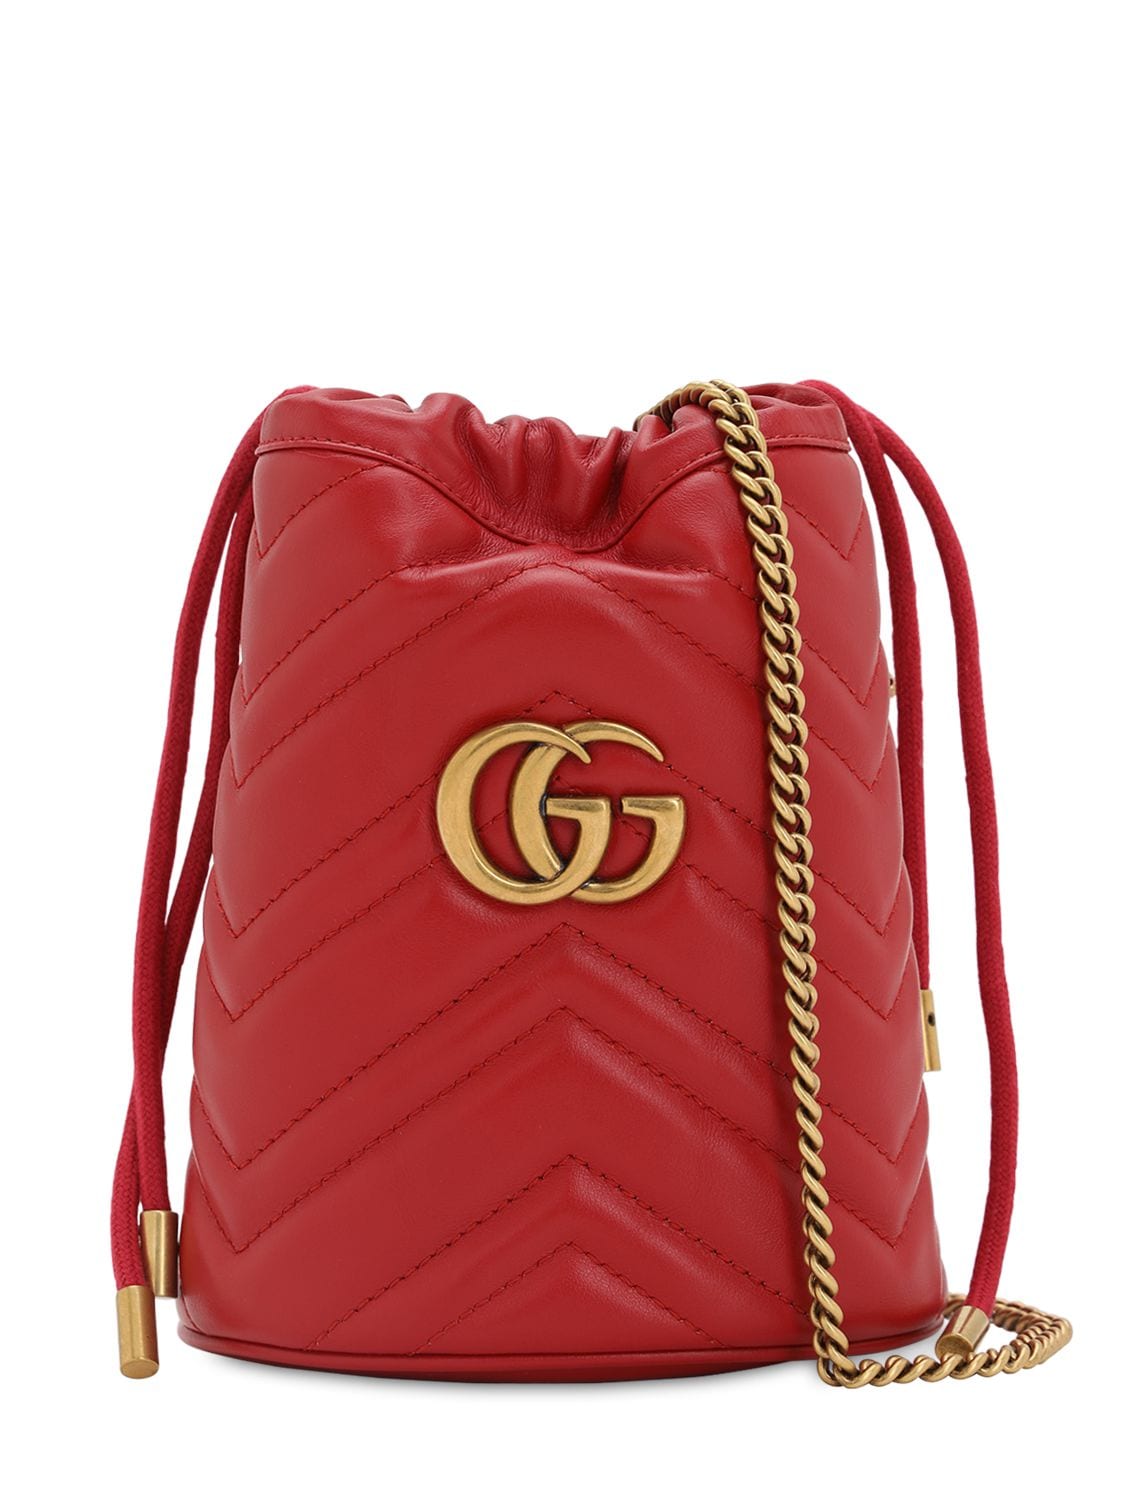 Gucci Mini Gg Marmont 2.0 Leather Bucket Bag In Hibiscus Red